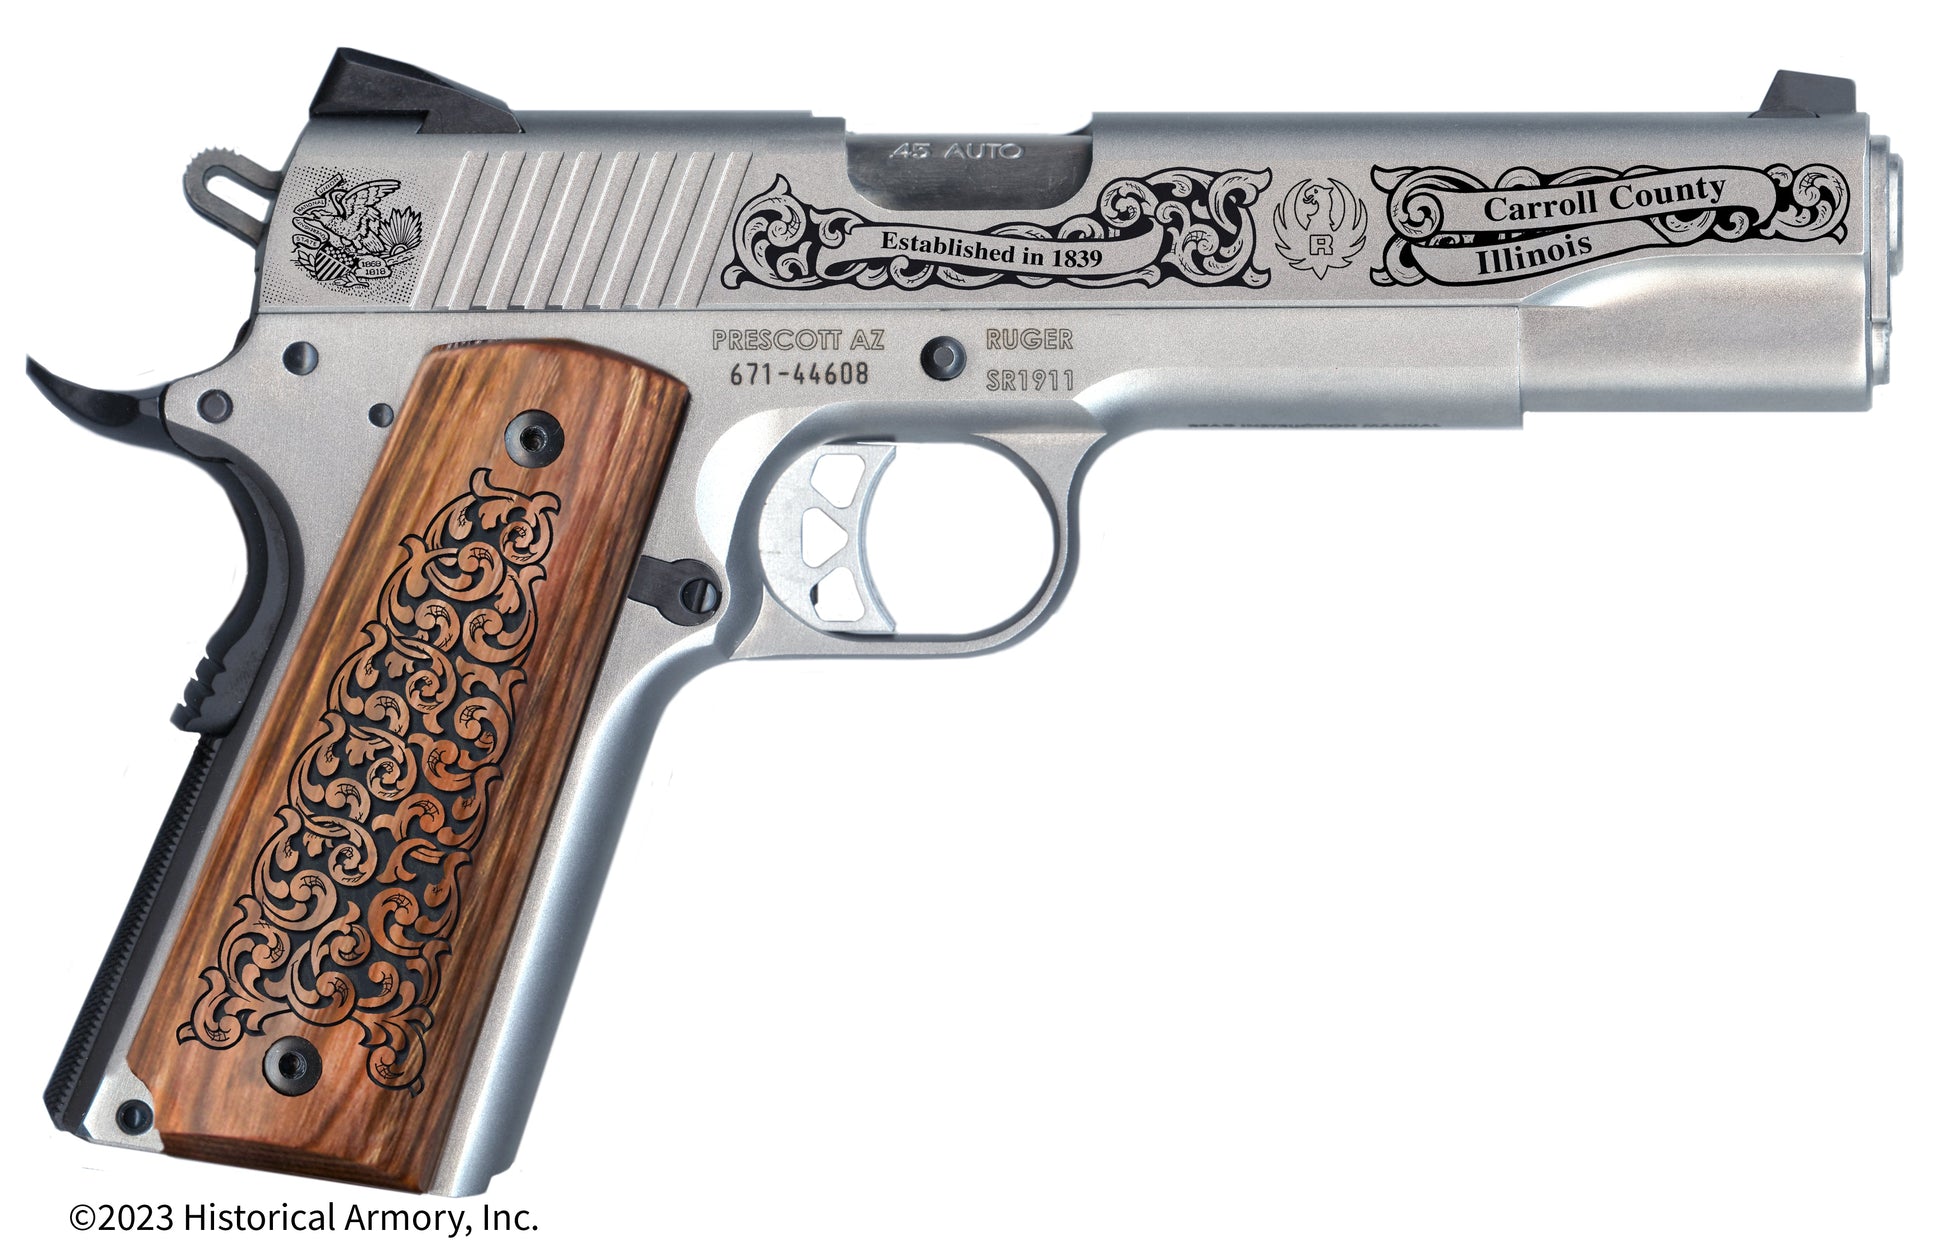 Carroll County Illinois Engraved .45 Auto Ruger 1911